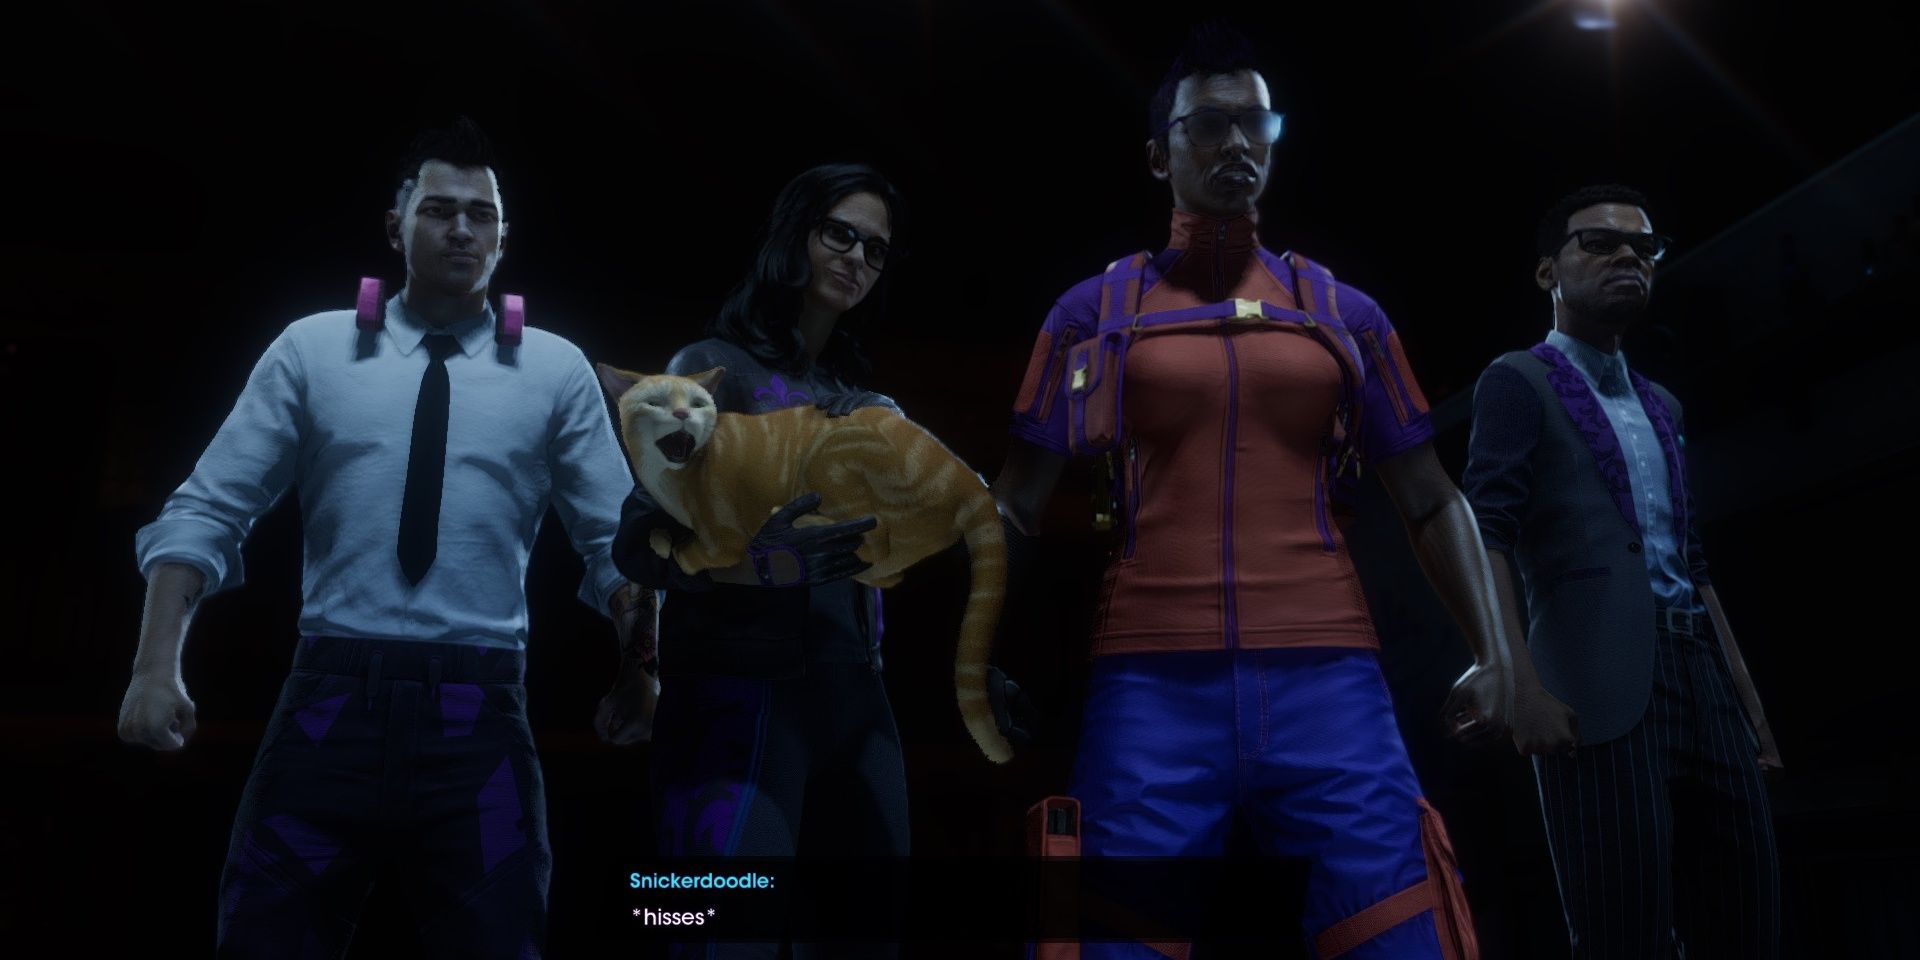 Saints Row The Boss and their friends confronting their nemesis as Snickerdoodle the cat hisses